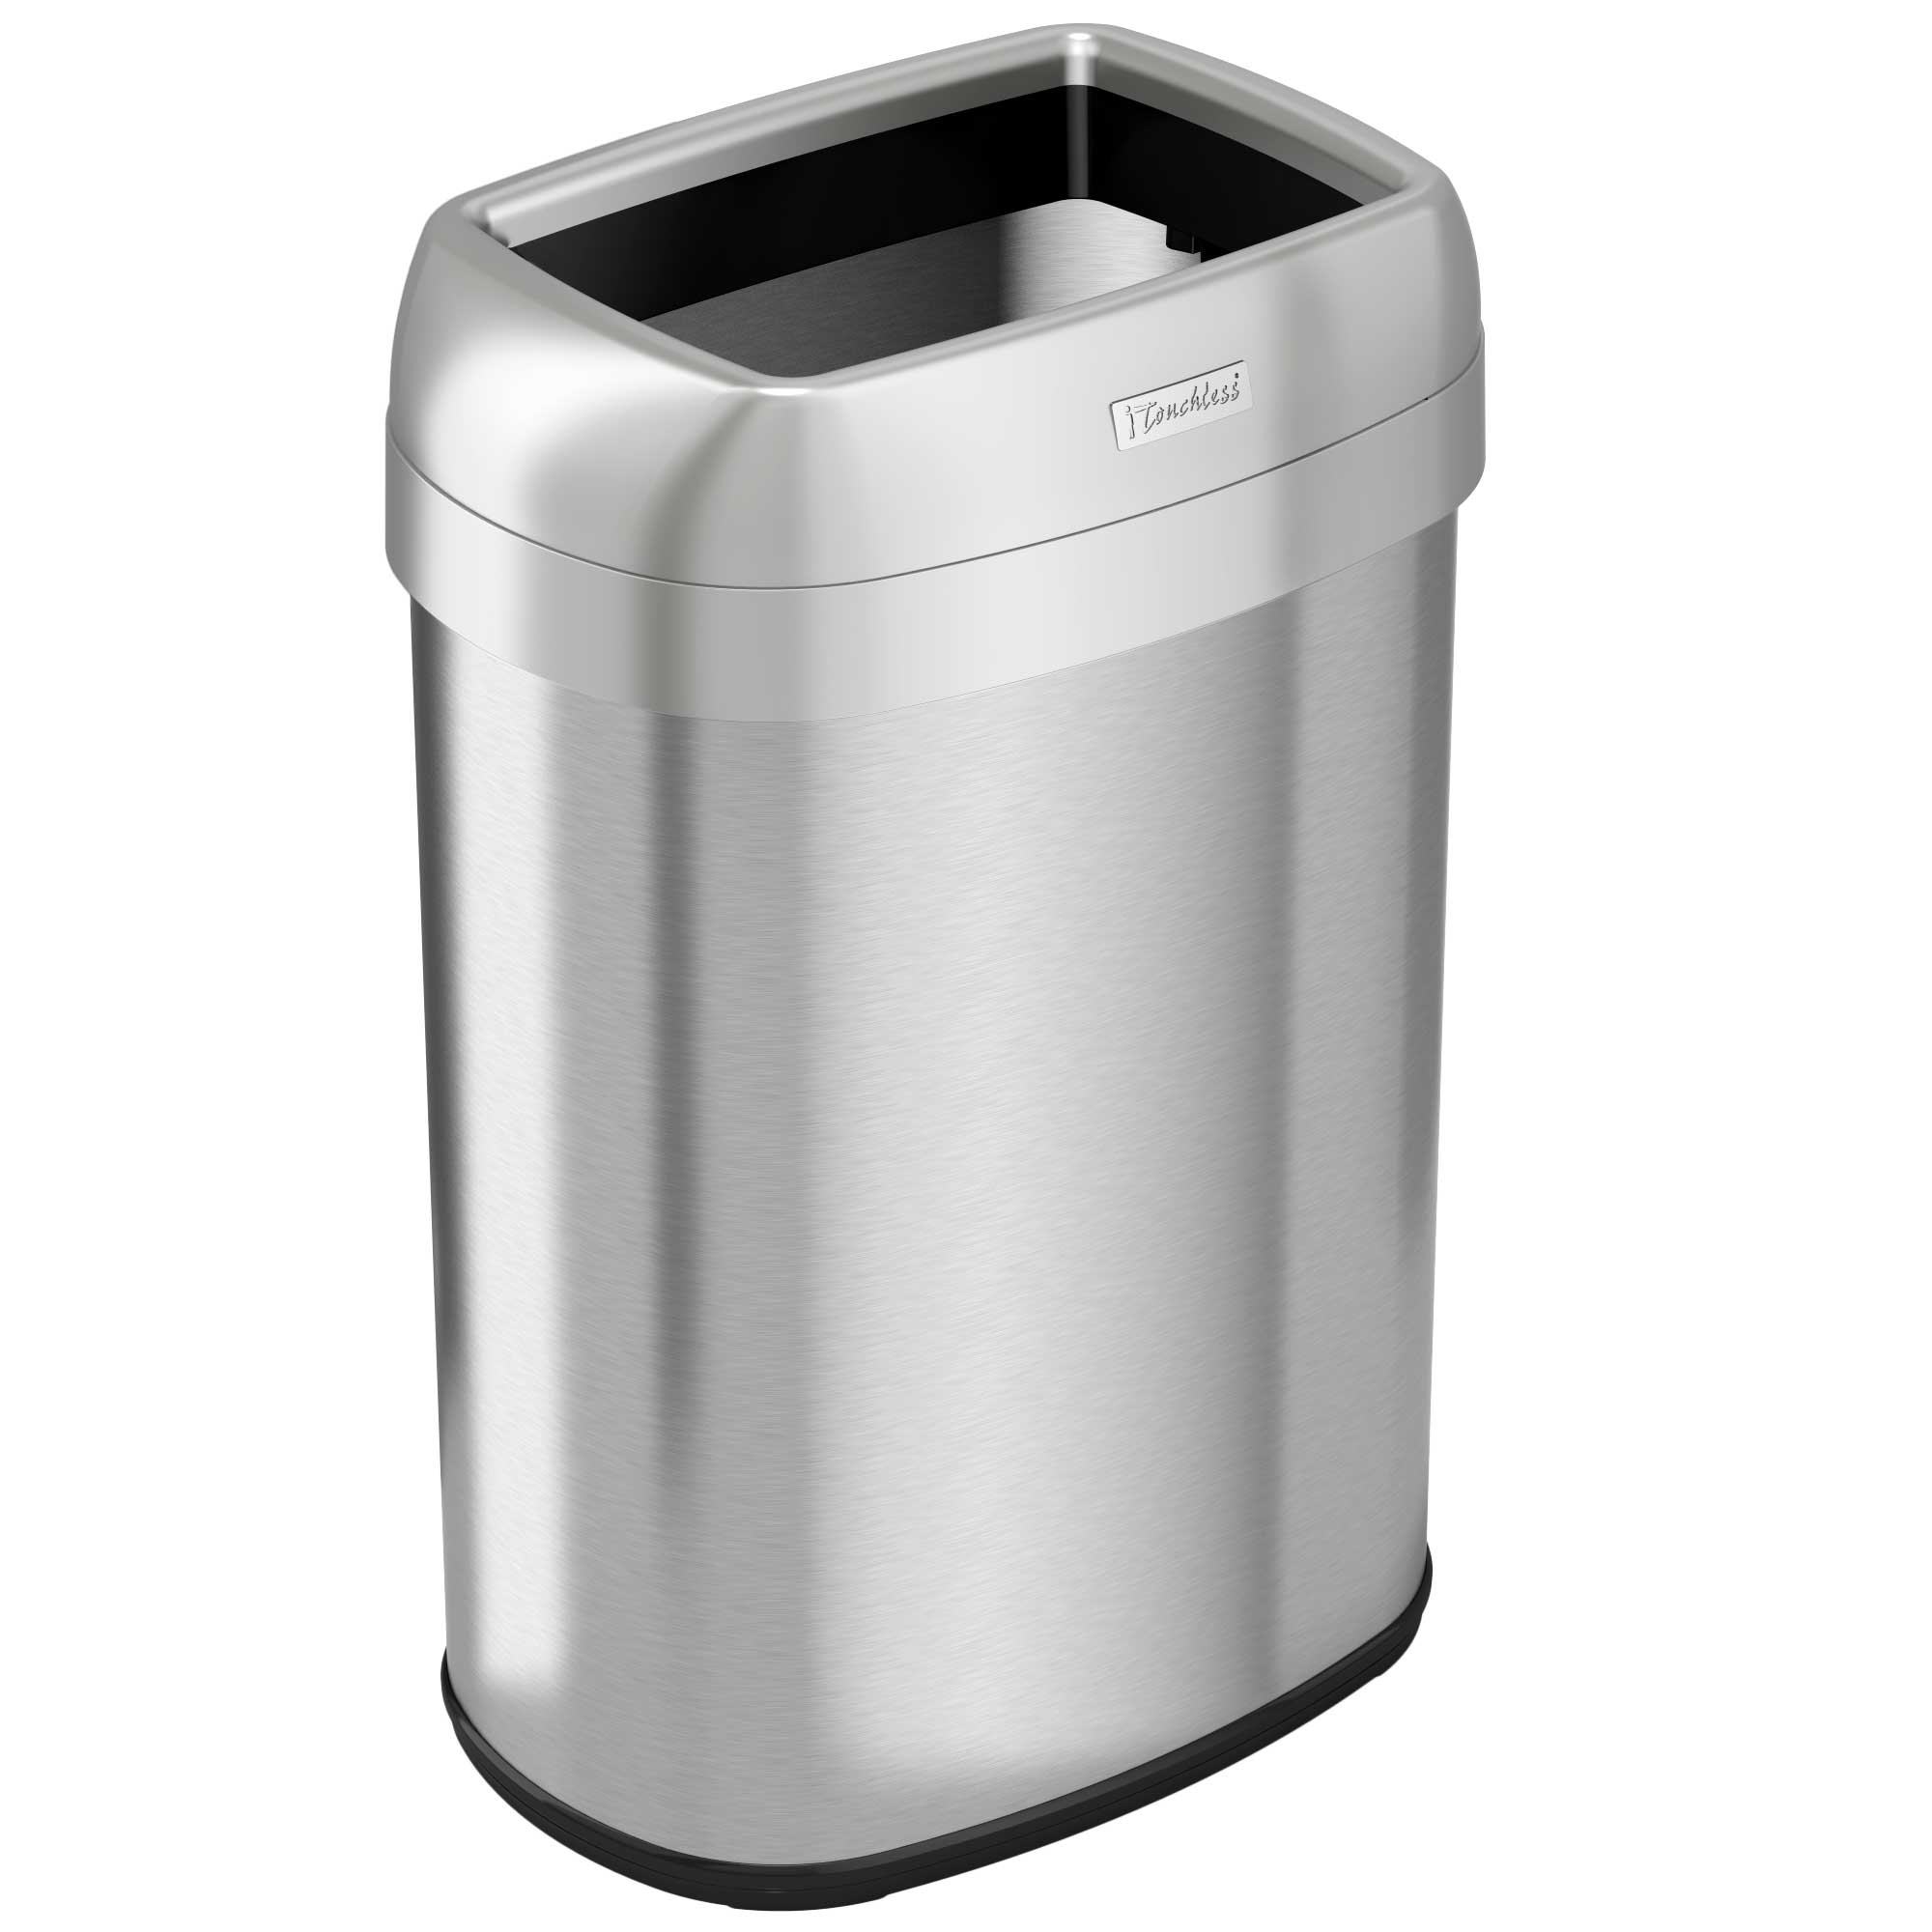 13 Gallon Elliptical Open Top Trash Can – iTouchless Housewares and  Products Inc.